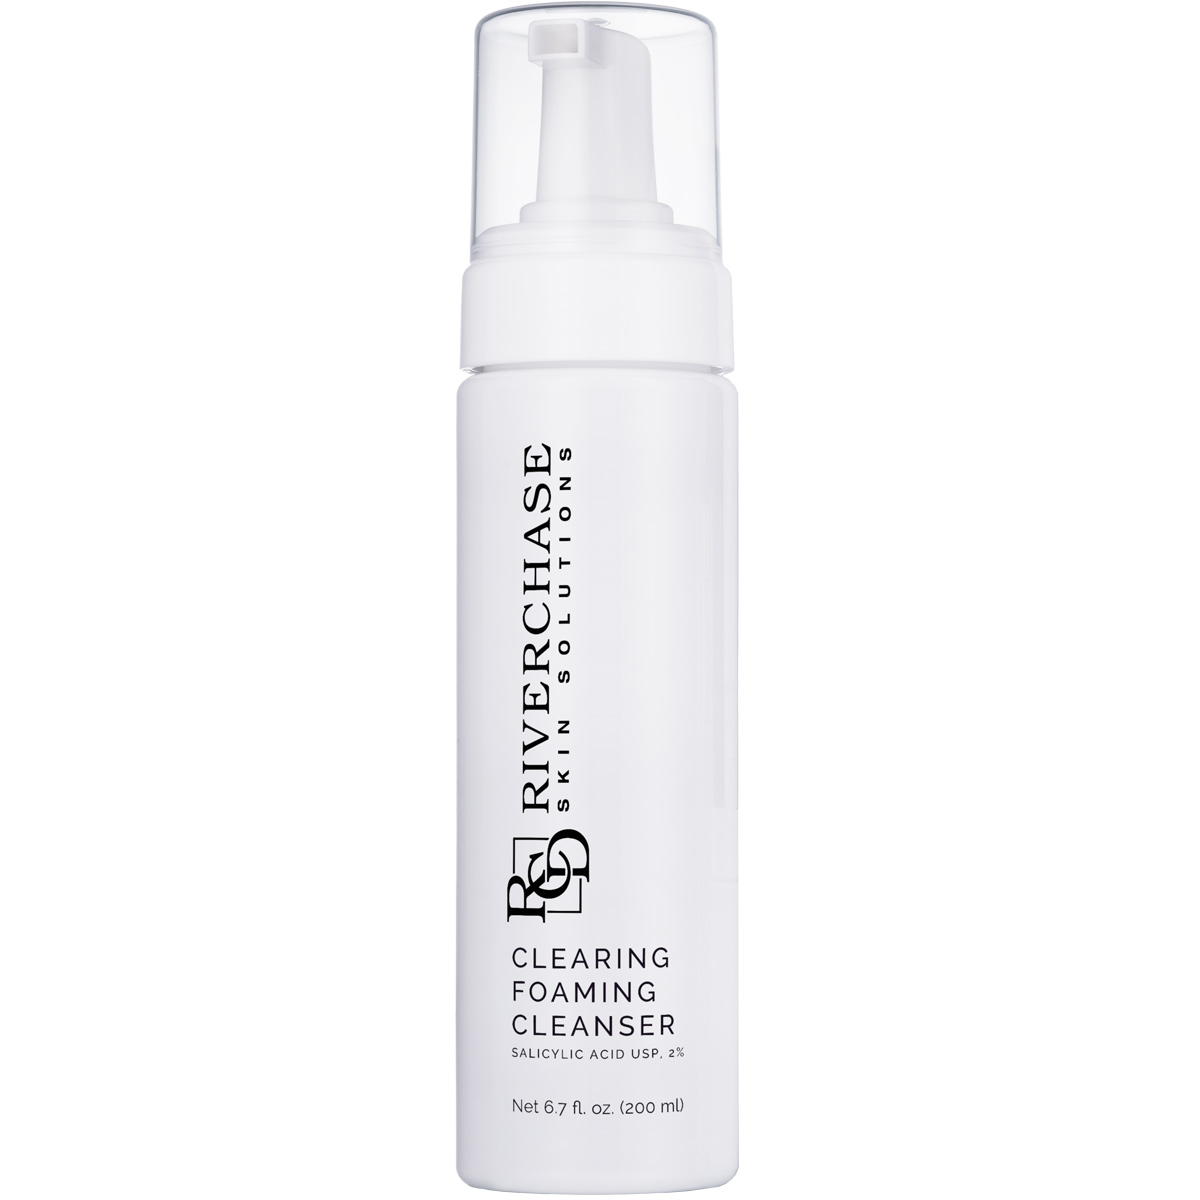 Clearing Foaming Cleanser